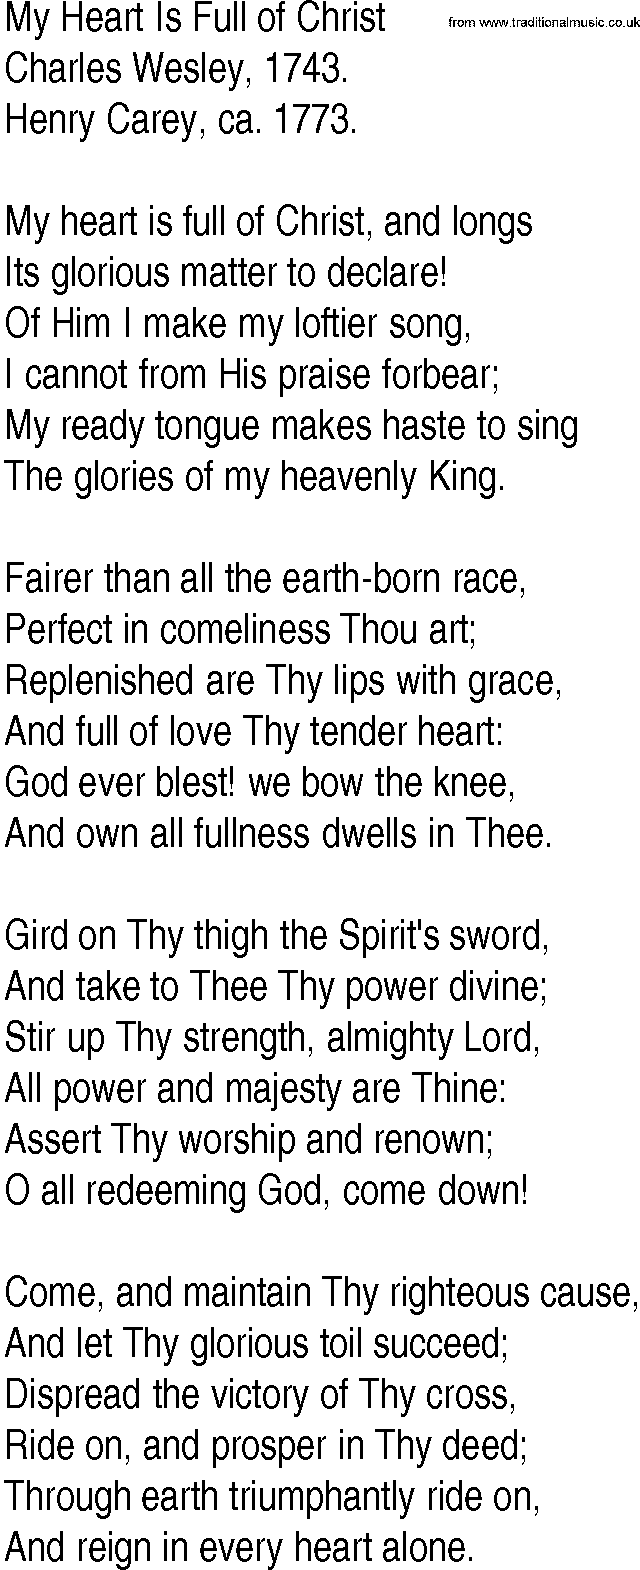 Hymn and Gospel Song: My Heart Is Full of Christ by Charles Wesley lyrics